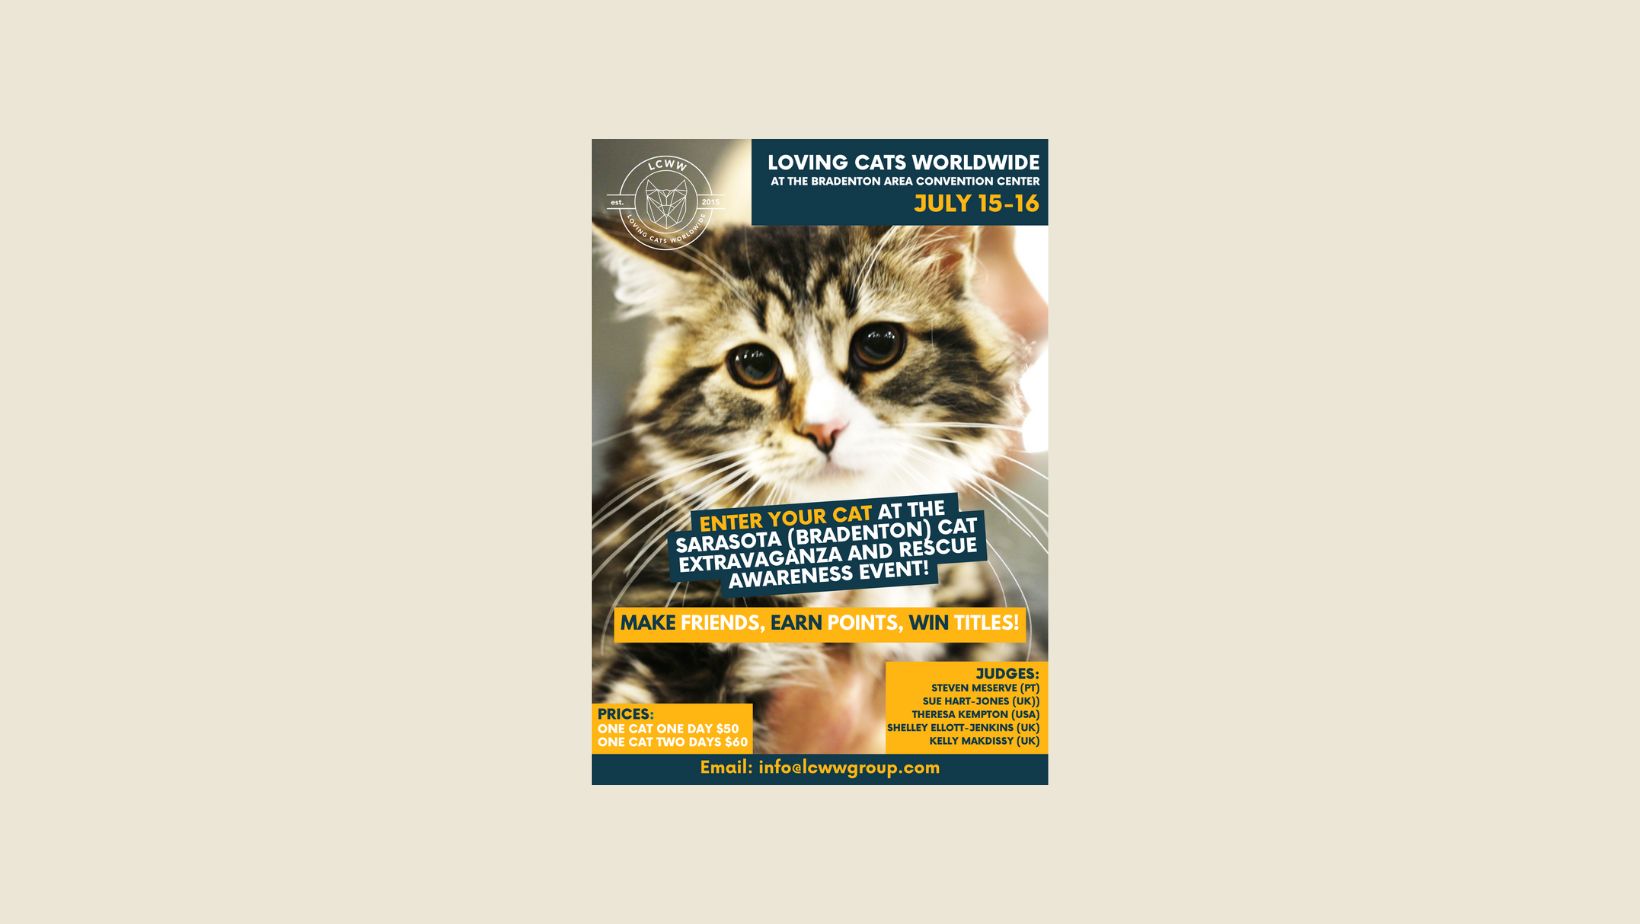 MA - Boston Cat Extravaganza & Rescue Awareness Event by Loving Cats  Worldwide — LCWW